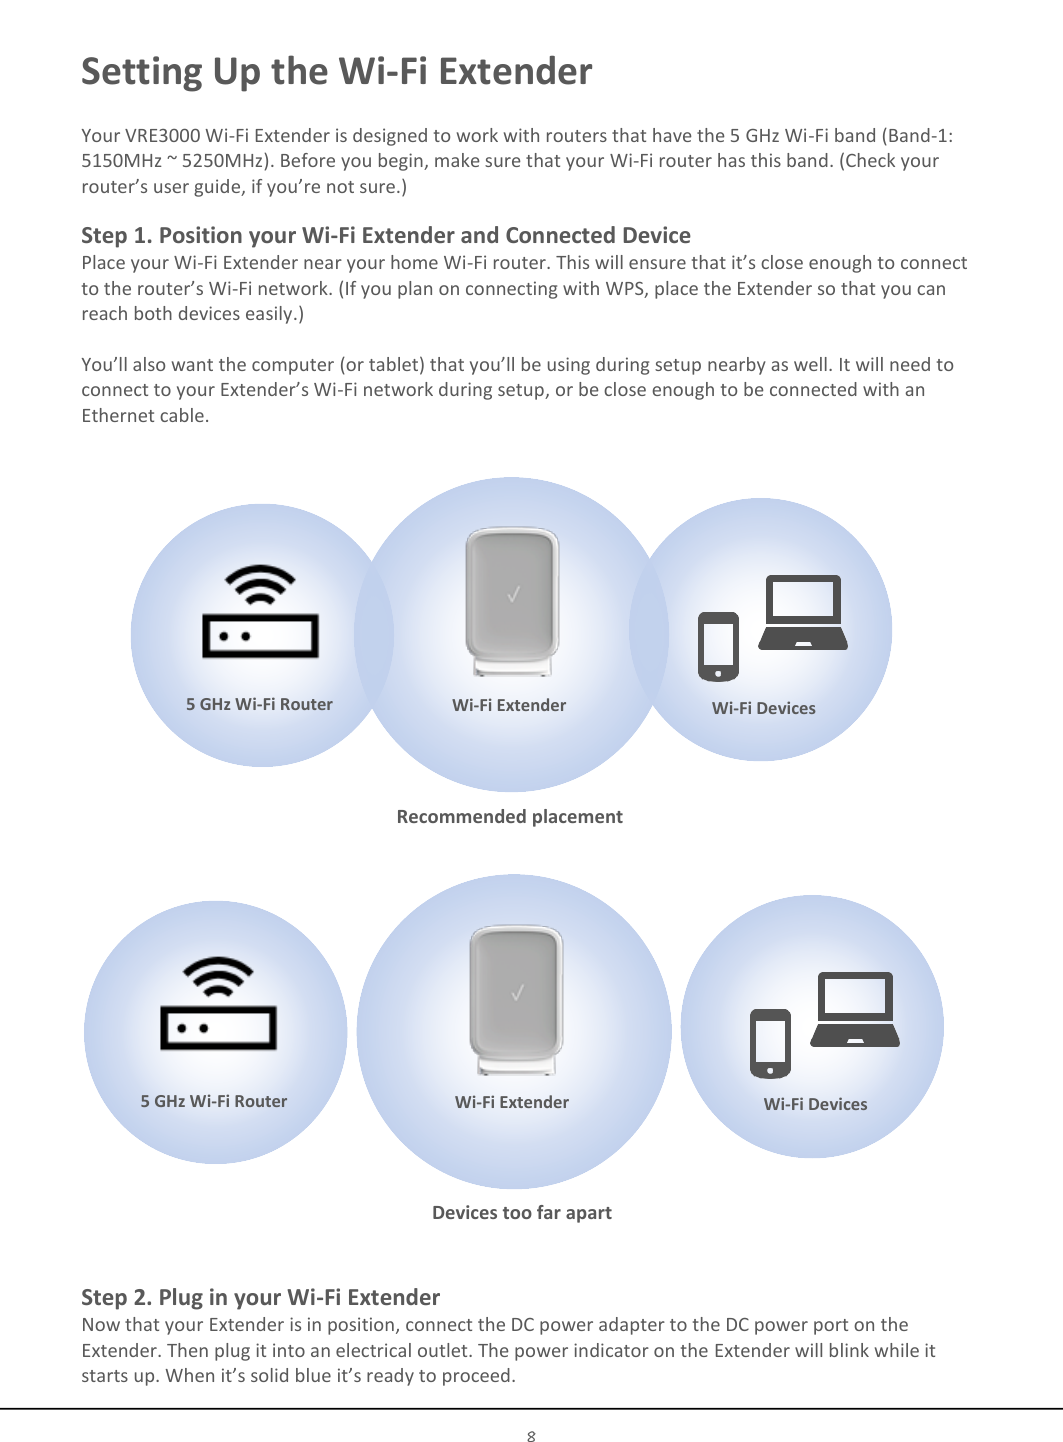 3 Getting Started 8  Setting Up the Wi-Fi Extender  Your VRE3000 Wi-Fi Extender is designed to work with routers that have the 5 GHz Wi-Fi band (Band-1: 5150MHz ~ 5250MHz). Before you begin, make sure that your Wi-Fi router has this band. (Check your router’s user guide, if you’re not sure.) Step 1. Position your Wi-Fi Extender and Connected Device Place your Wi-Fi Extender near your home Wi-Fi router. This will ensure that it’s close enough to connect to the router’s Wi-Fi network. (If you plan on connecting with WPS, place the Extender so that you can reach both devices easily.) You’ll also want the computer (or tablet) that you’ll be using during setup nearby as well. It will need to connect to your Extender’s Wi-Fi network during setup, or be close enough to be connected with an Ethernet cable.    Step 2. Plug in your Wi-Fi Extender Now that your Extender is in position, connect the DC power adapter to the DC power port on the Extender. Then plug it into an electrical outlet. The power indicator on the Extender will blink while it starts up. When it’s solid blue it’s ready to proceed. Wi-Fi Extender 5 GHz Wi-Fi Router Wi-Fi Devices Recommended placement Wi-Fi Extender 5 GHz Wi-Fi Router Wi-Fi Devices Devices too far apart 